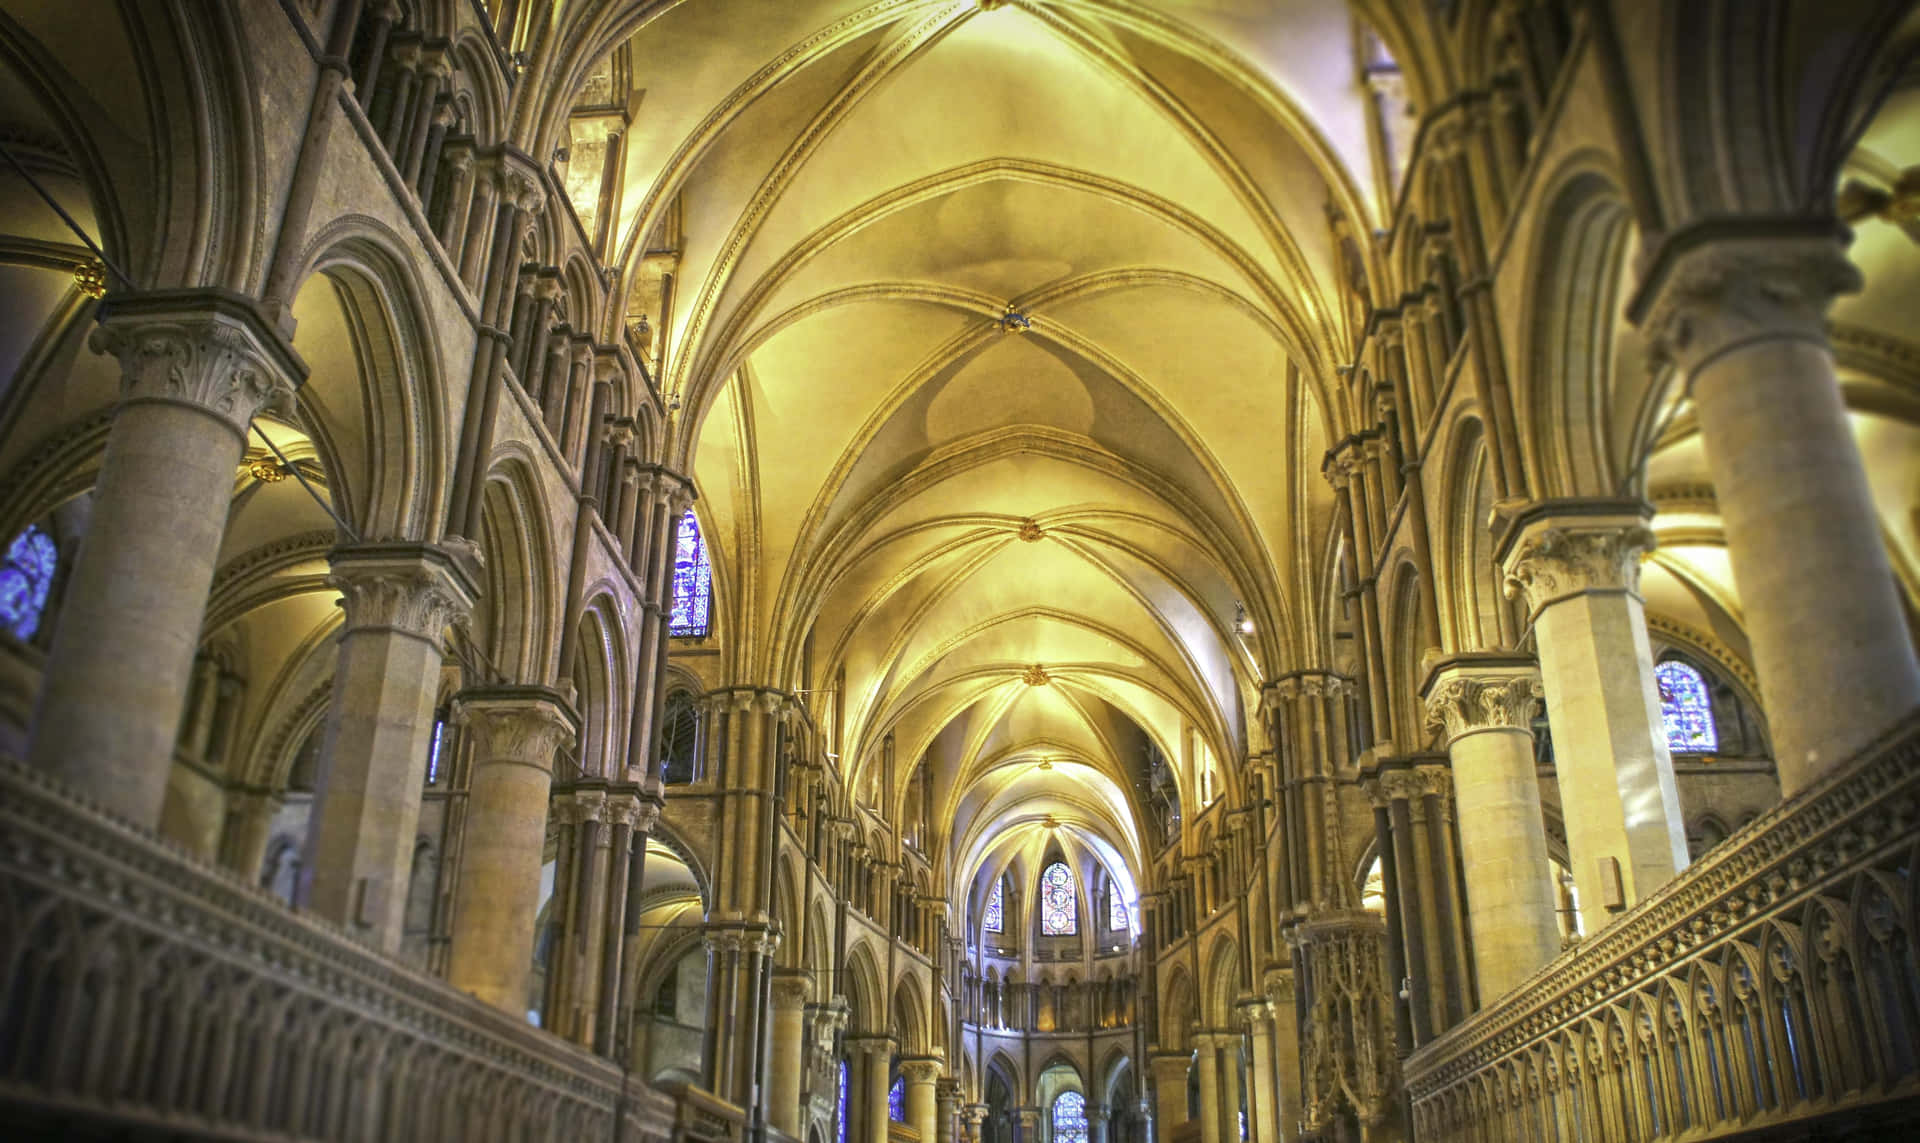 A Stunning Architecture Inside The Canterbury Cathedral Wallpaper